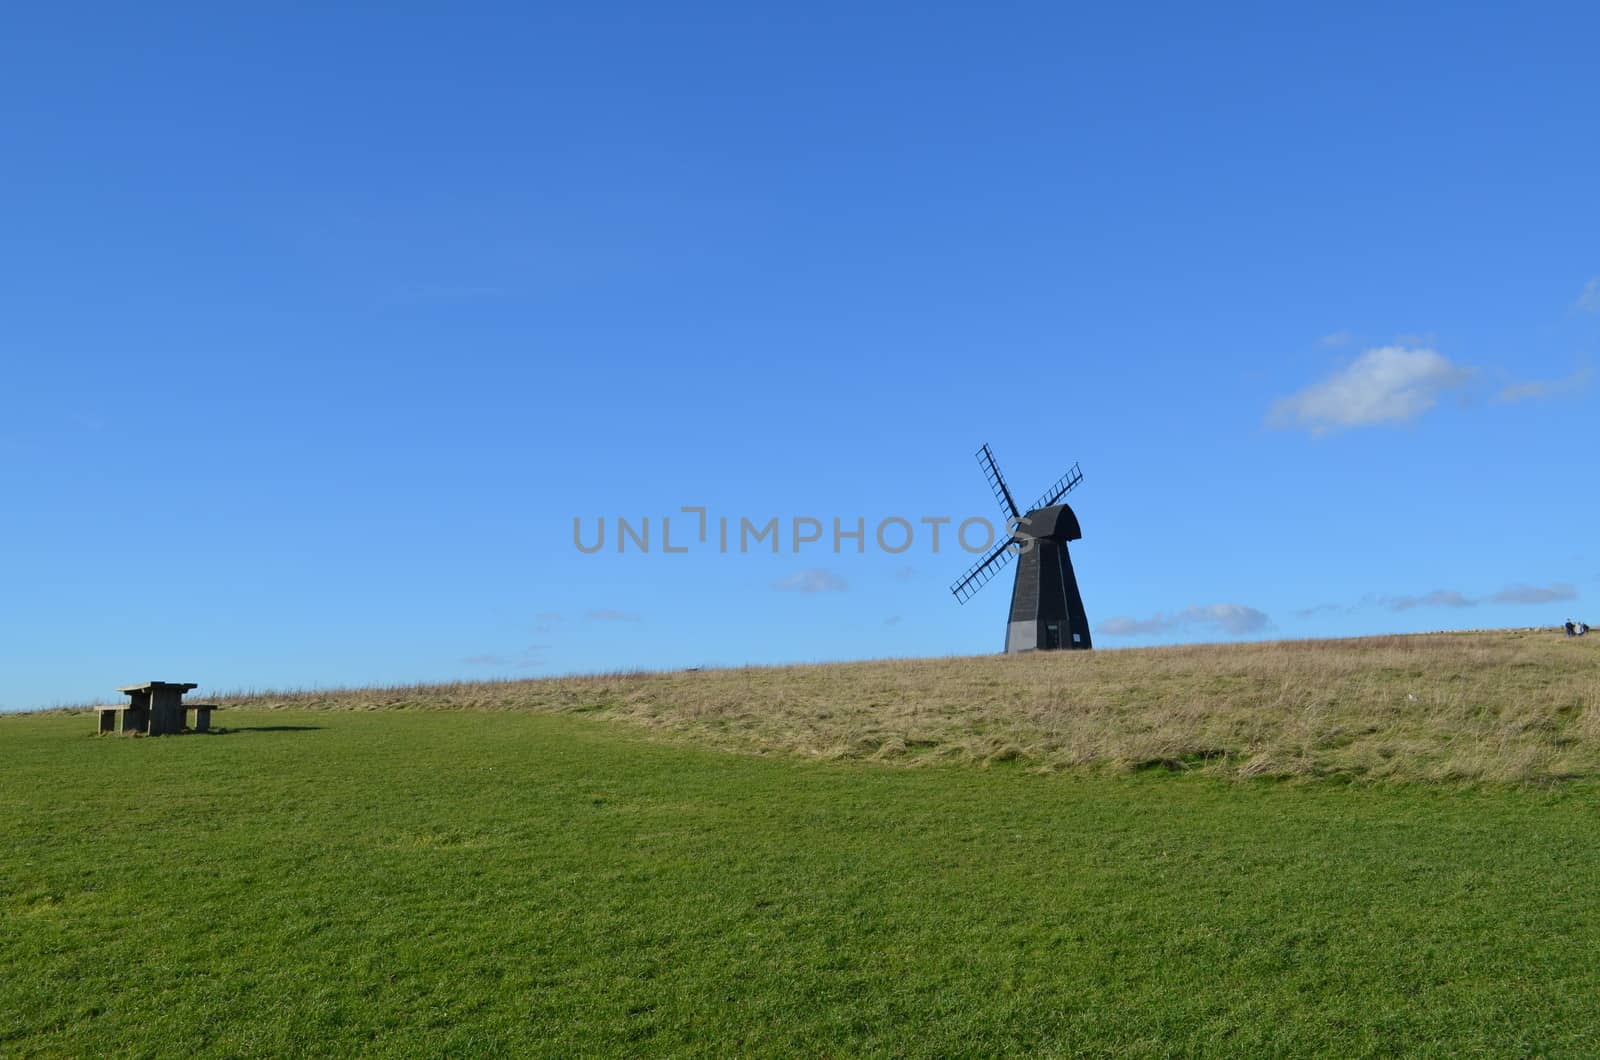 Built in 1802 this traditional smock windmill is at Rottingdean,East Sussex,England.